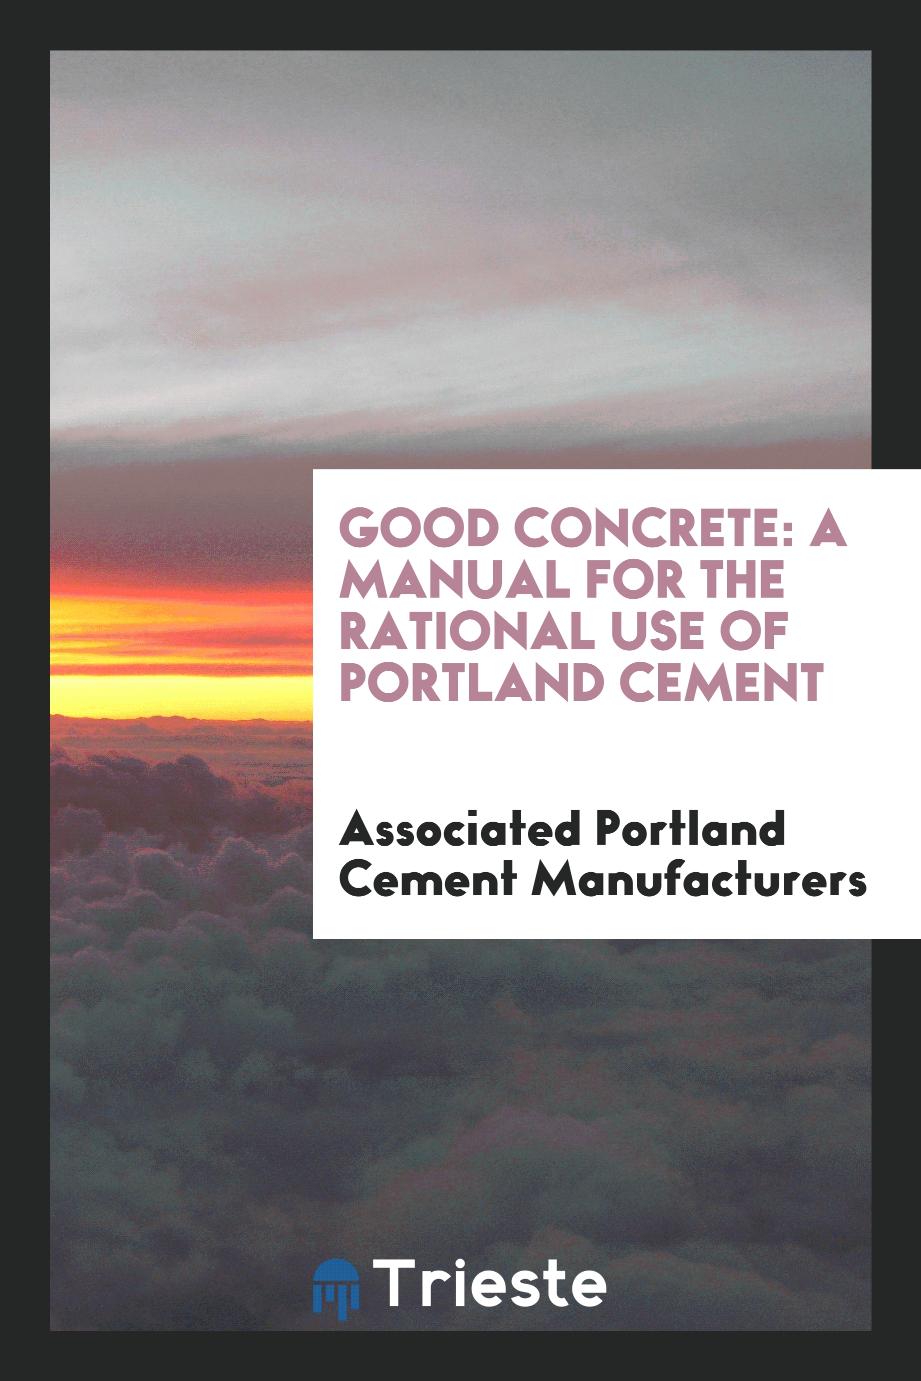 Good concrete: a manual for the rational use of Portland Cement